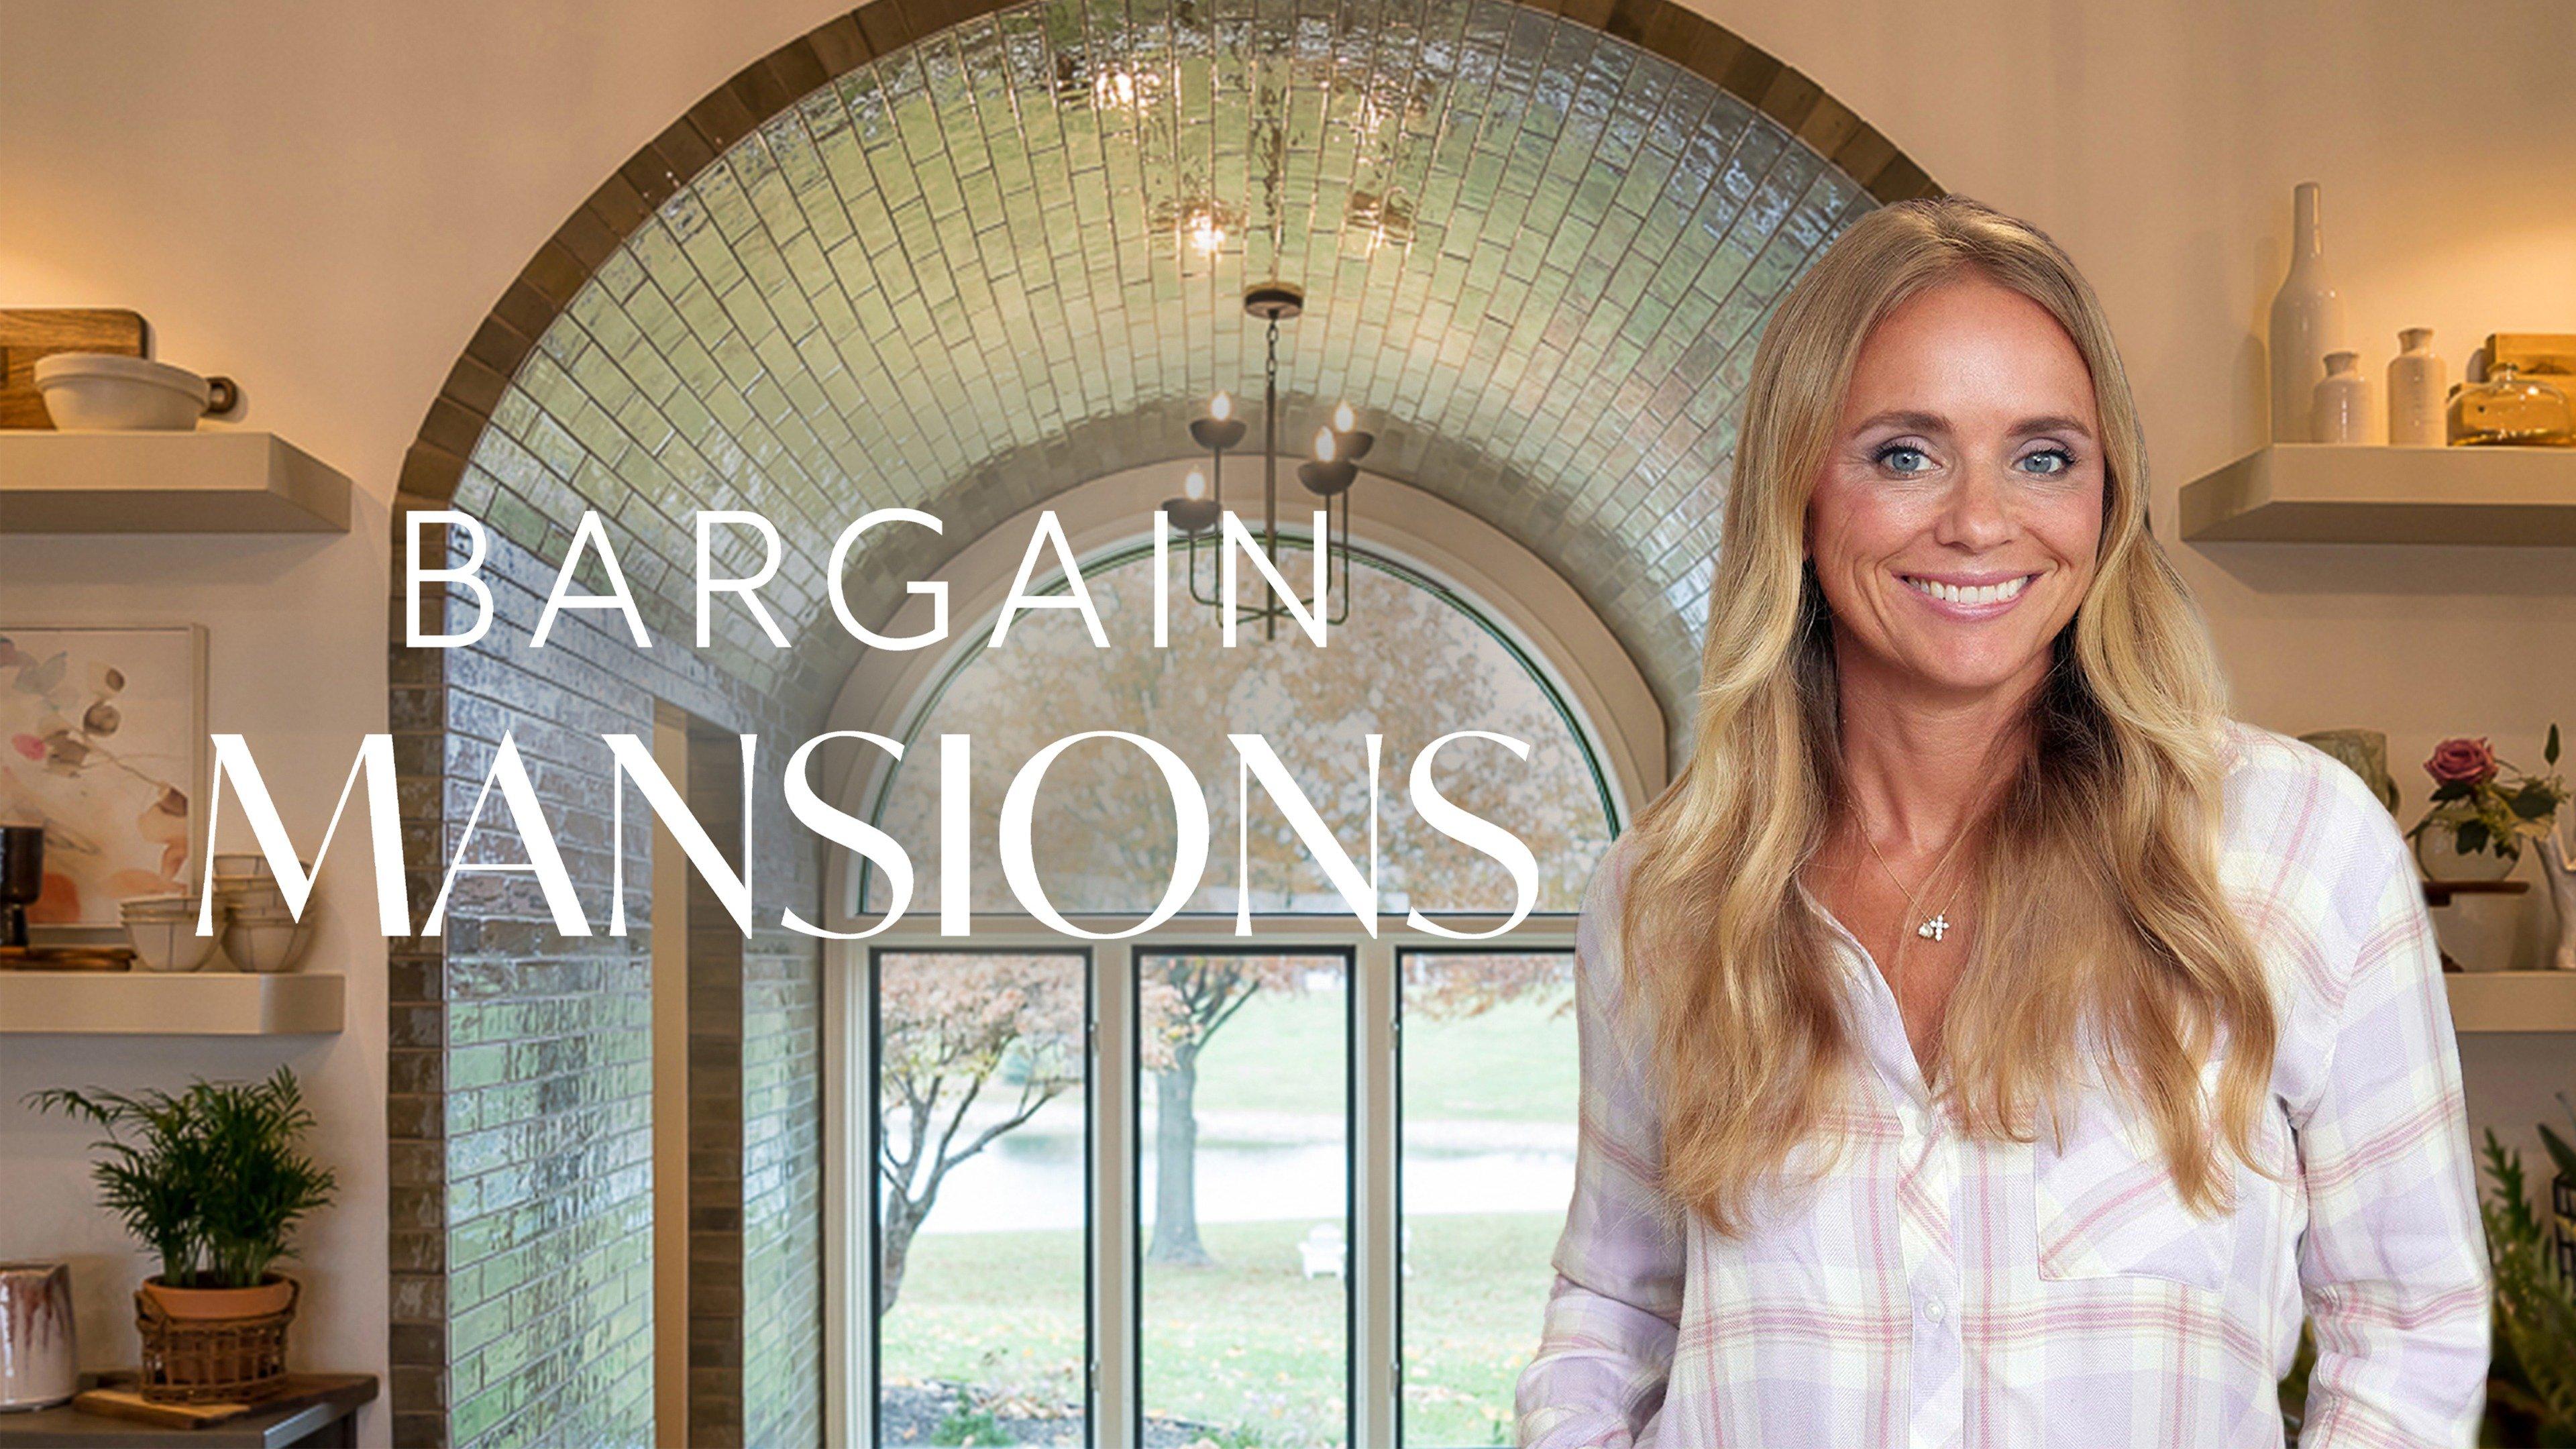 Watch Bargain Mansions Streaming Online on Philo (Free Trial)